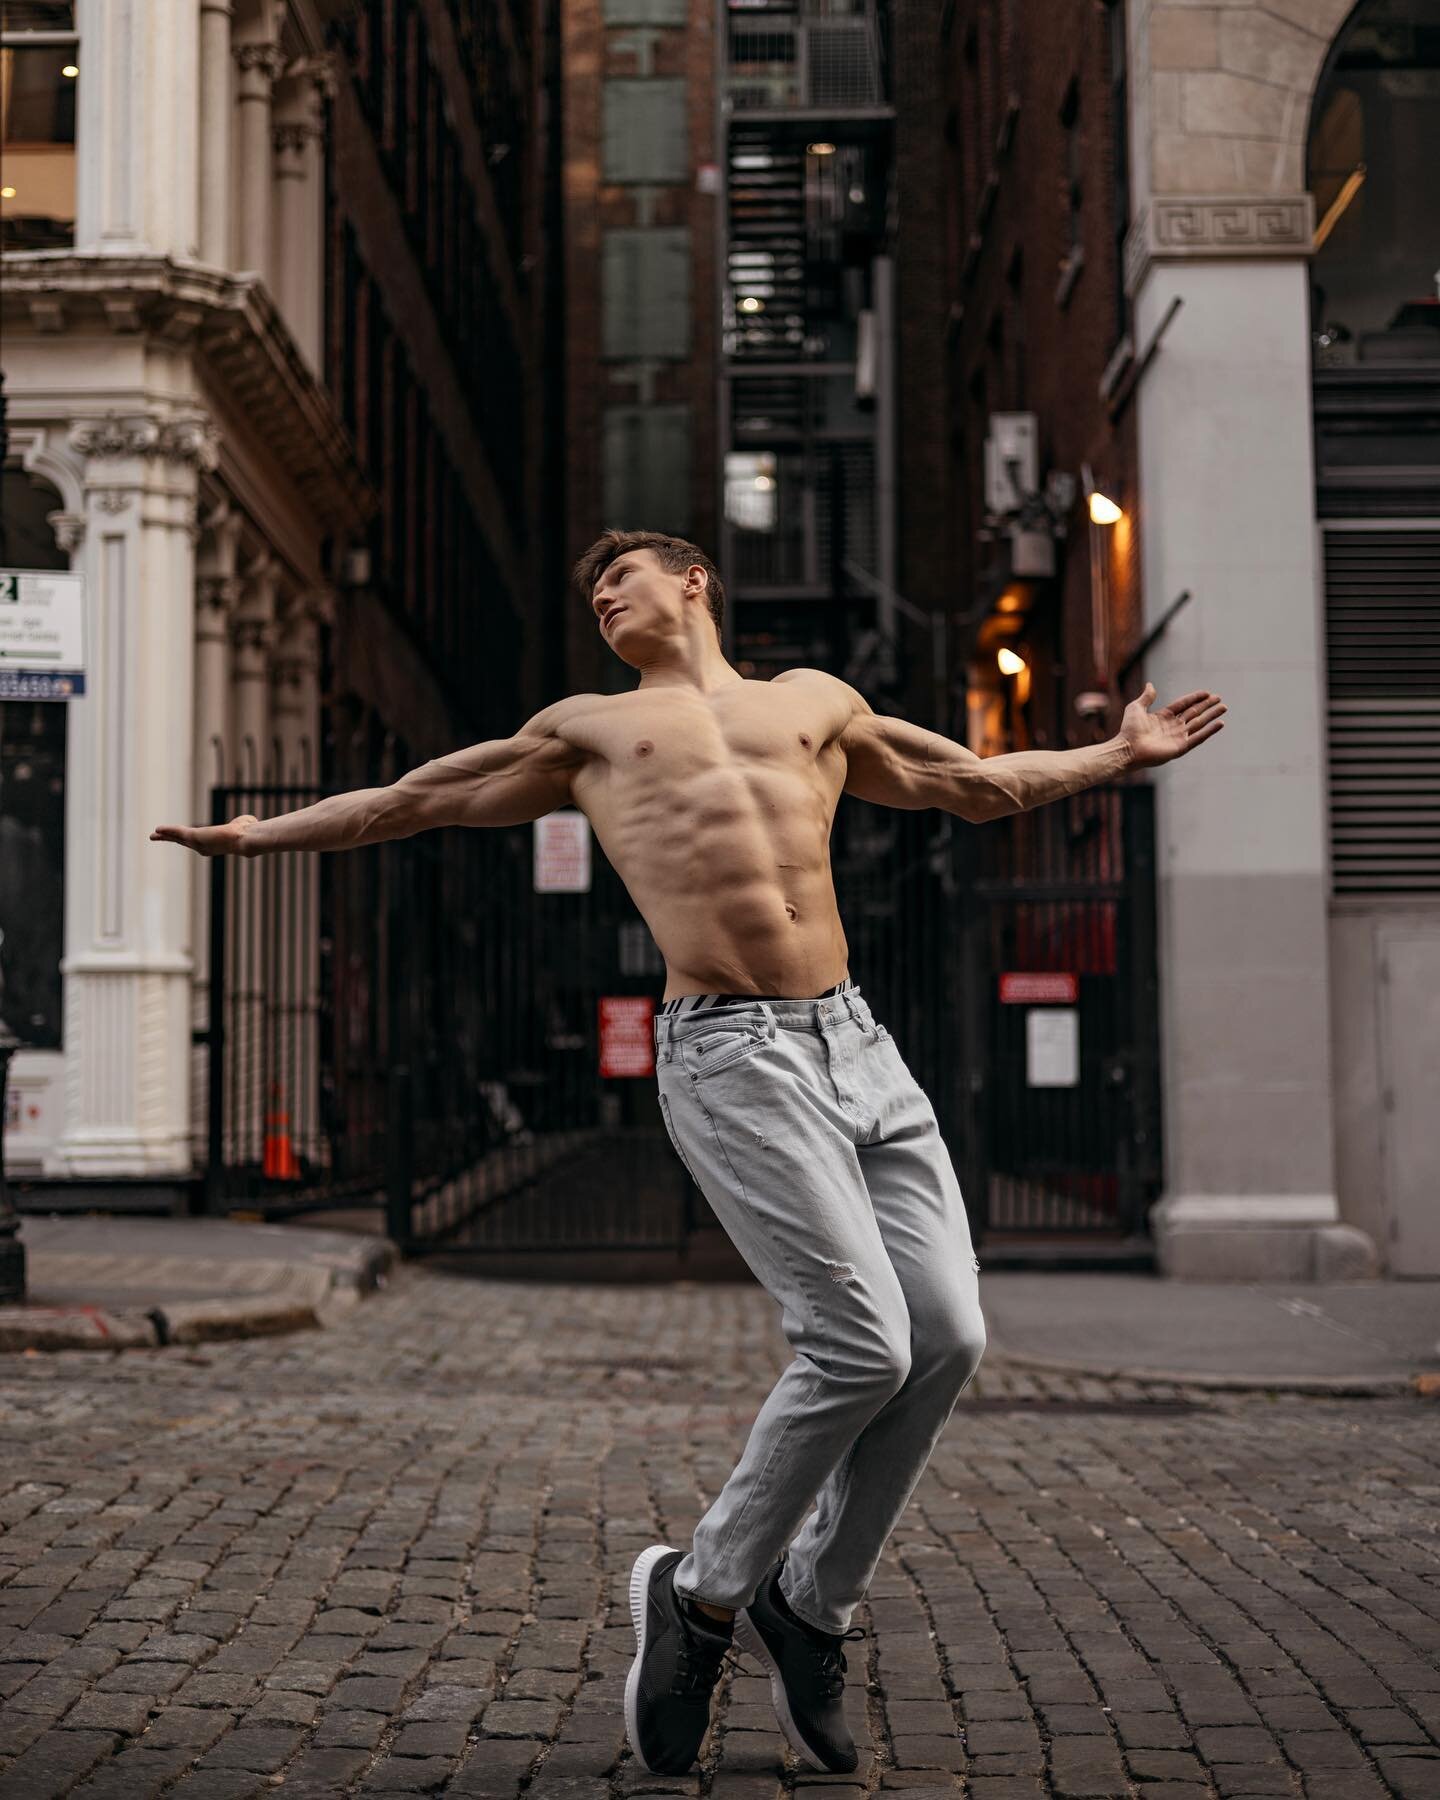 Model @diomer333n 

📹📸 by @duke.nyc 

#video #streetstyle #film #bts #behindthescenes #male  #malemodel #men  #mensstyle #menswear #underwear  #mensfashion #newyork #fitness #bodybuilding #body  #gym #muscle #abs #chest #fitness #workout #gymtime #